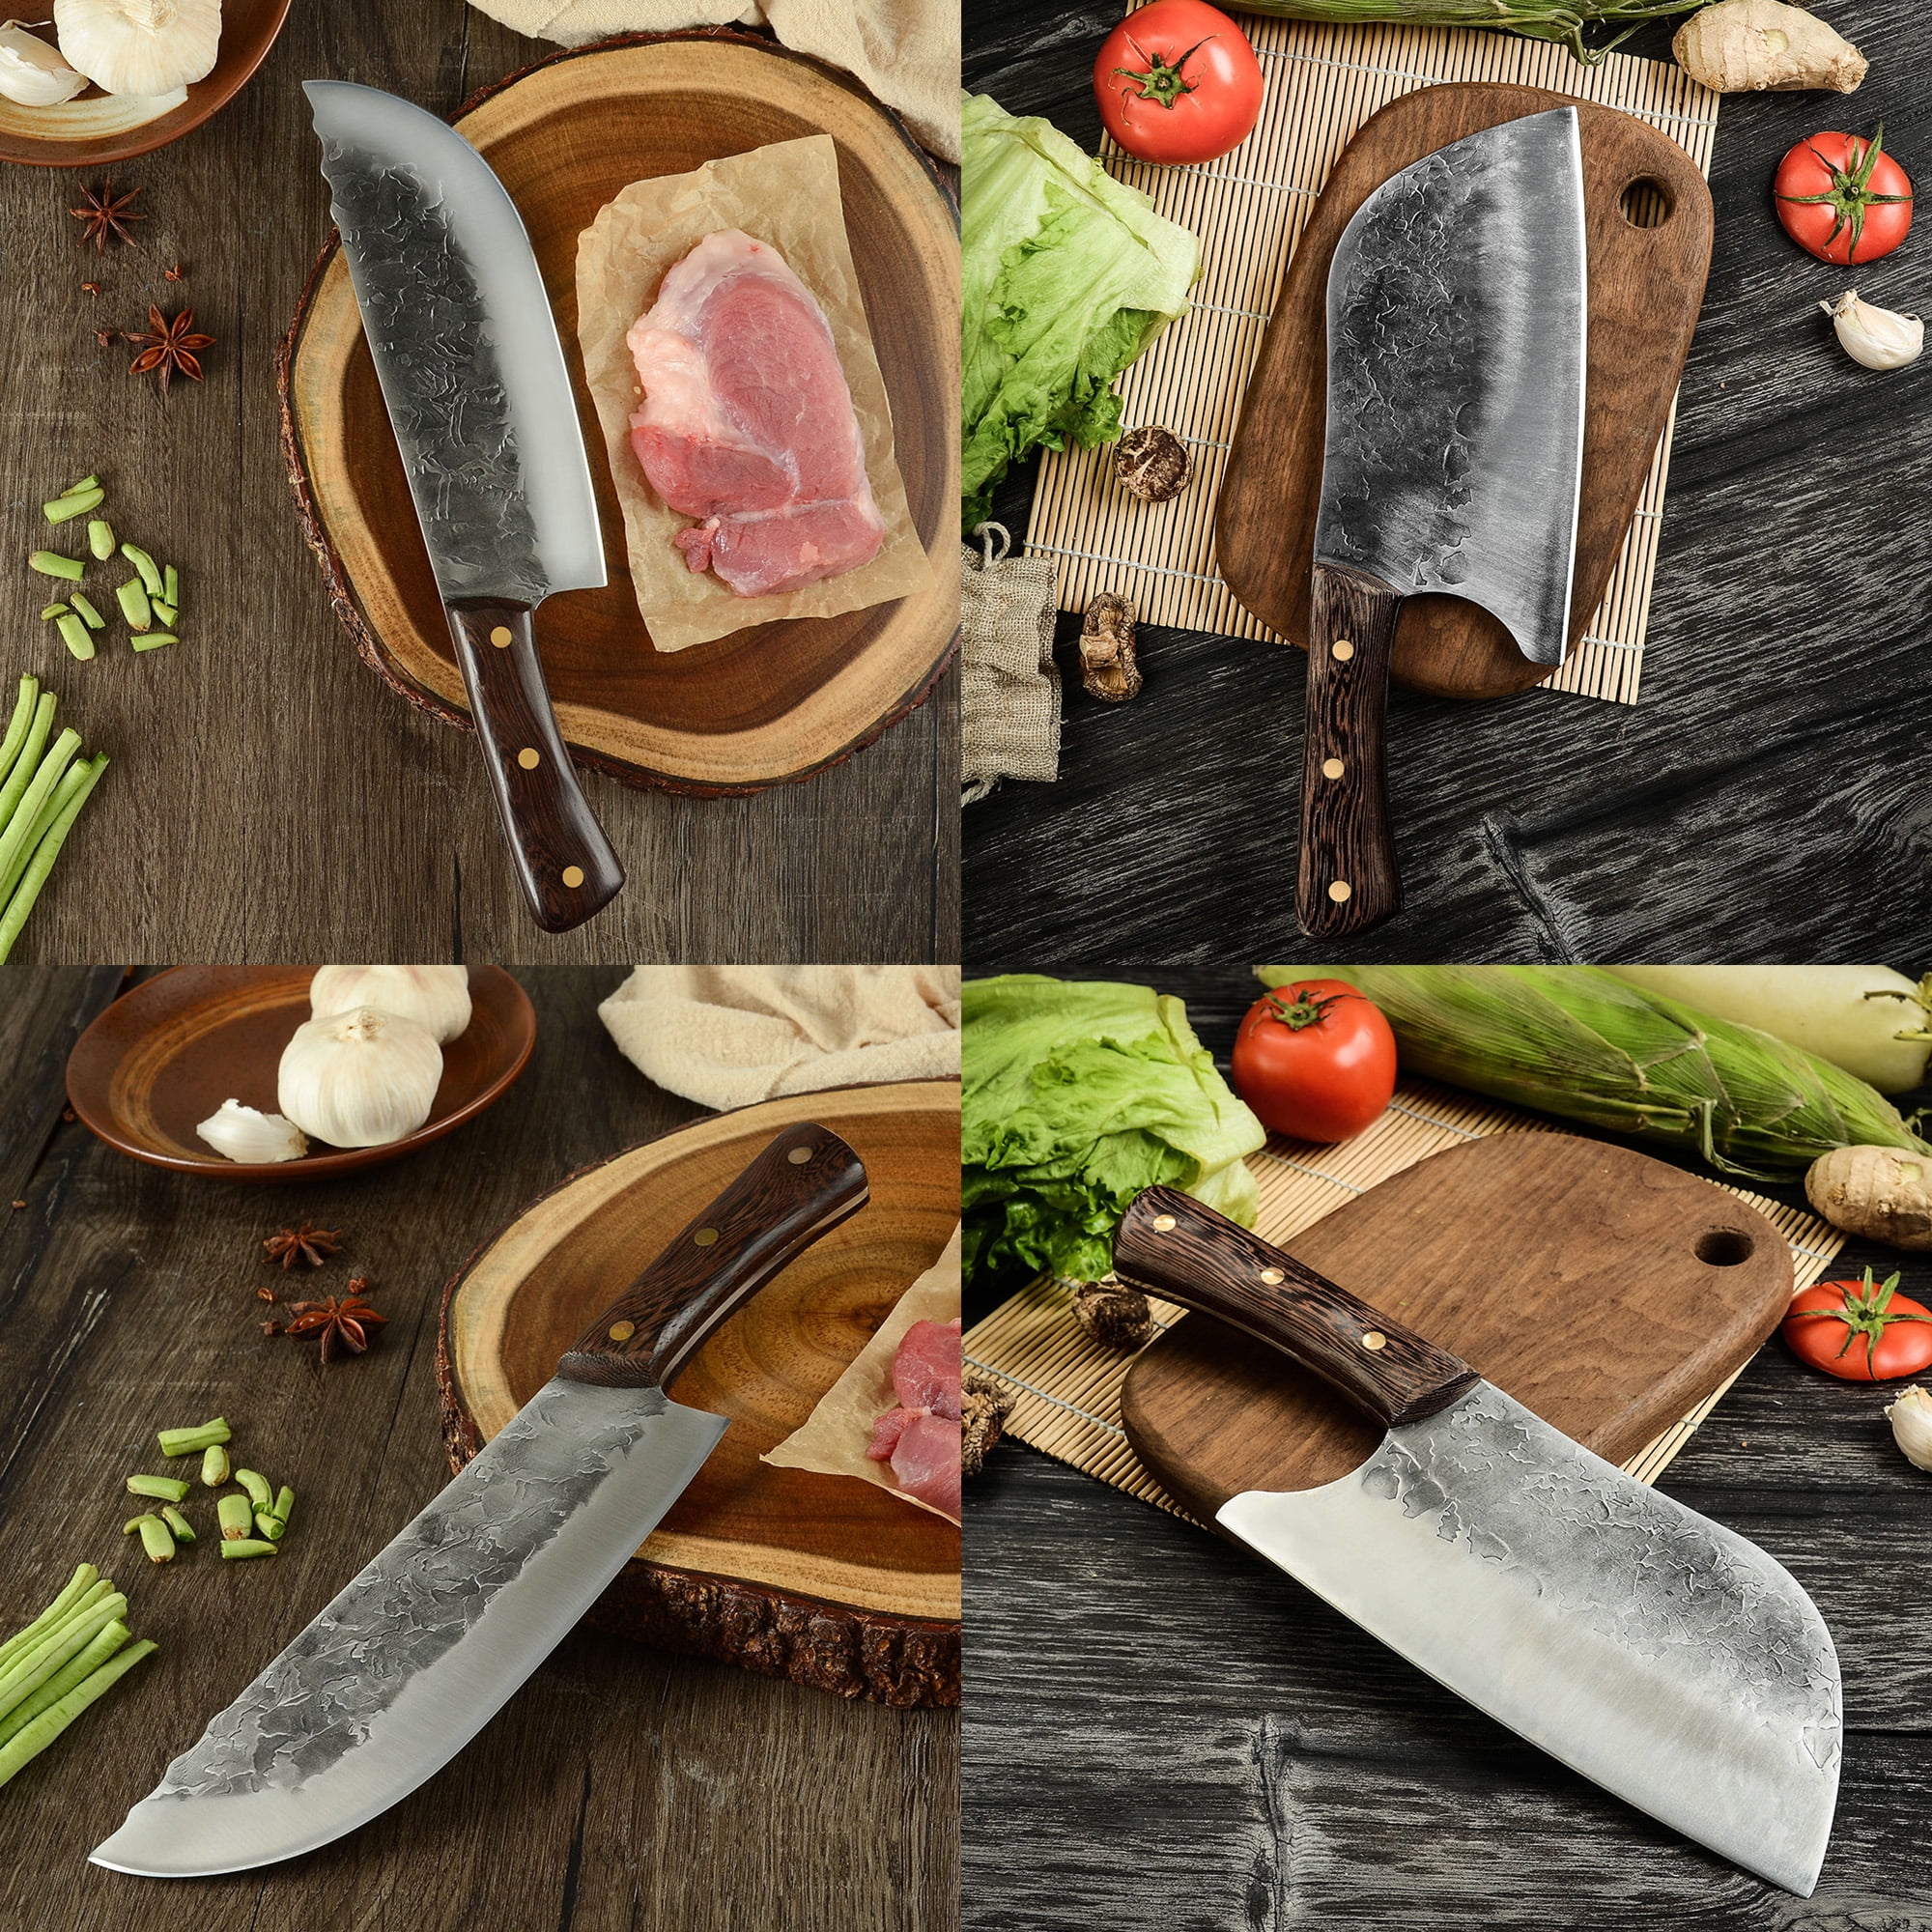 MeatProcessingProducts 2-Piece Butcher & Chef Knife Set, Model# 83-7004-W